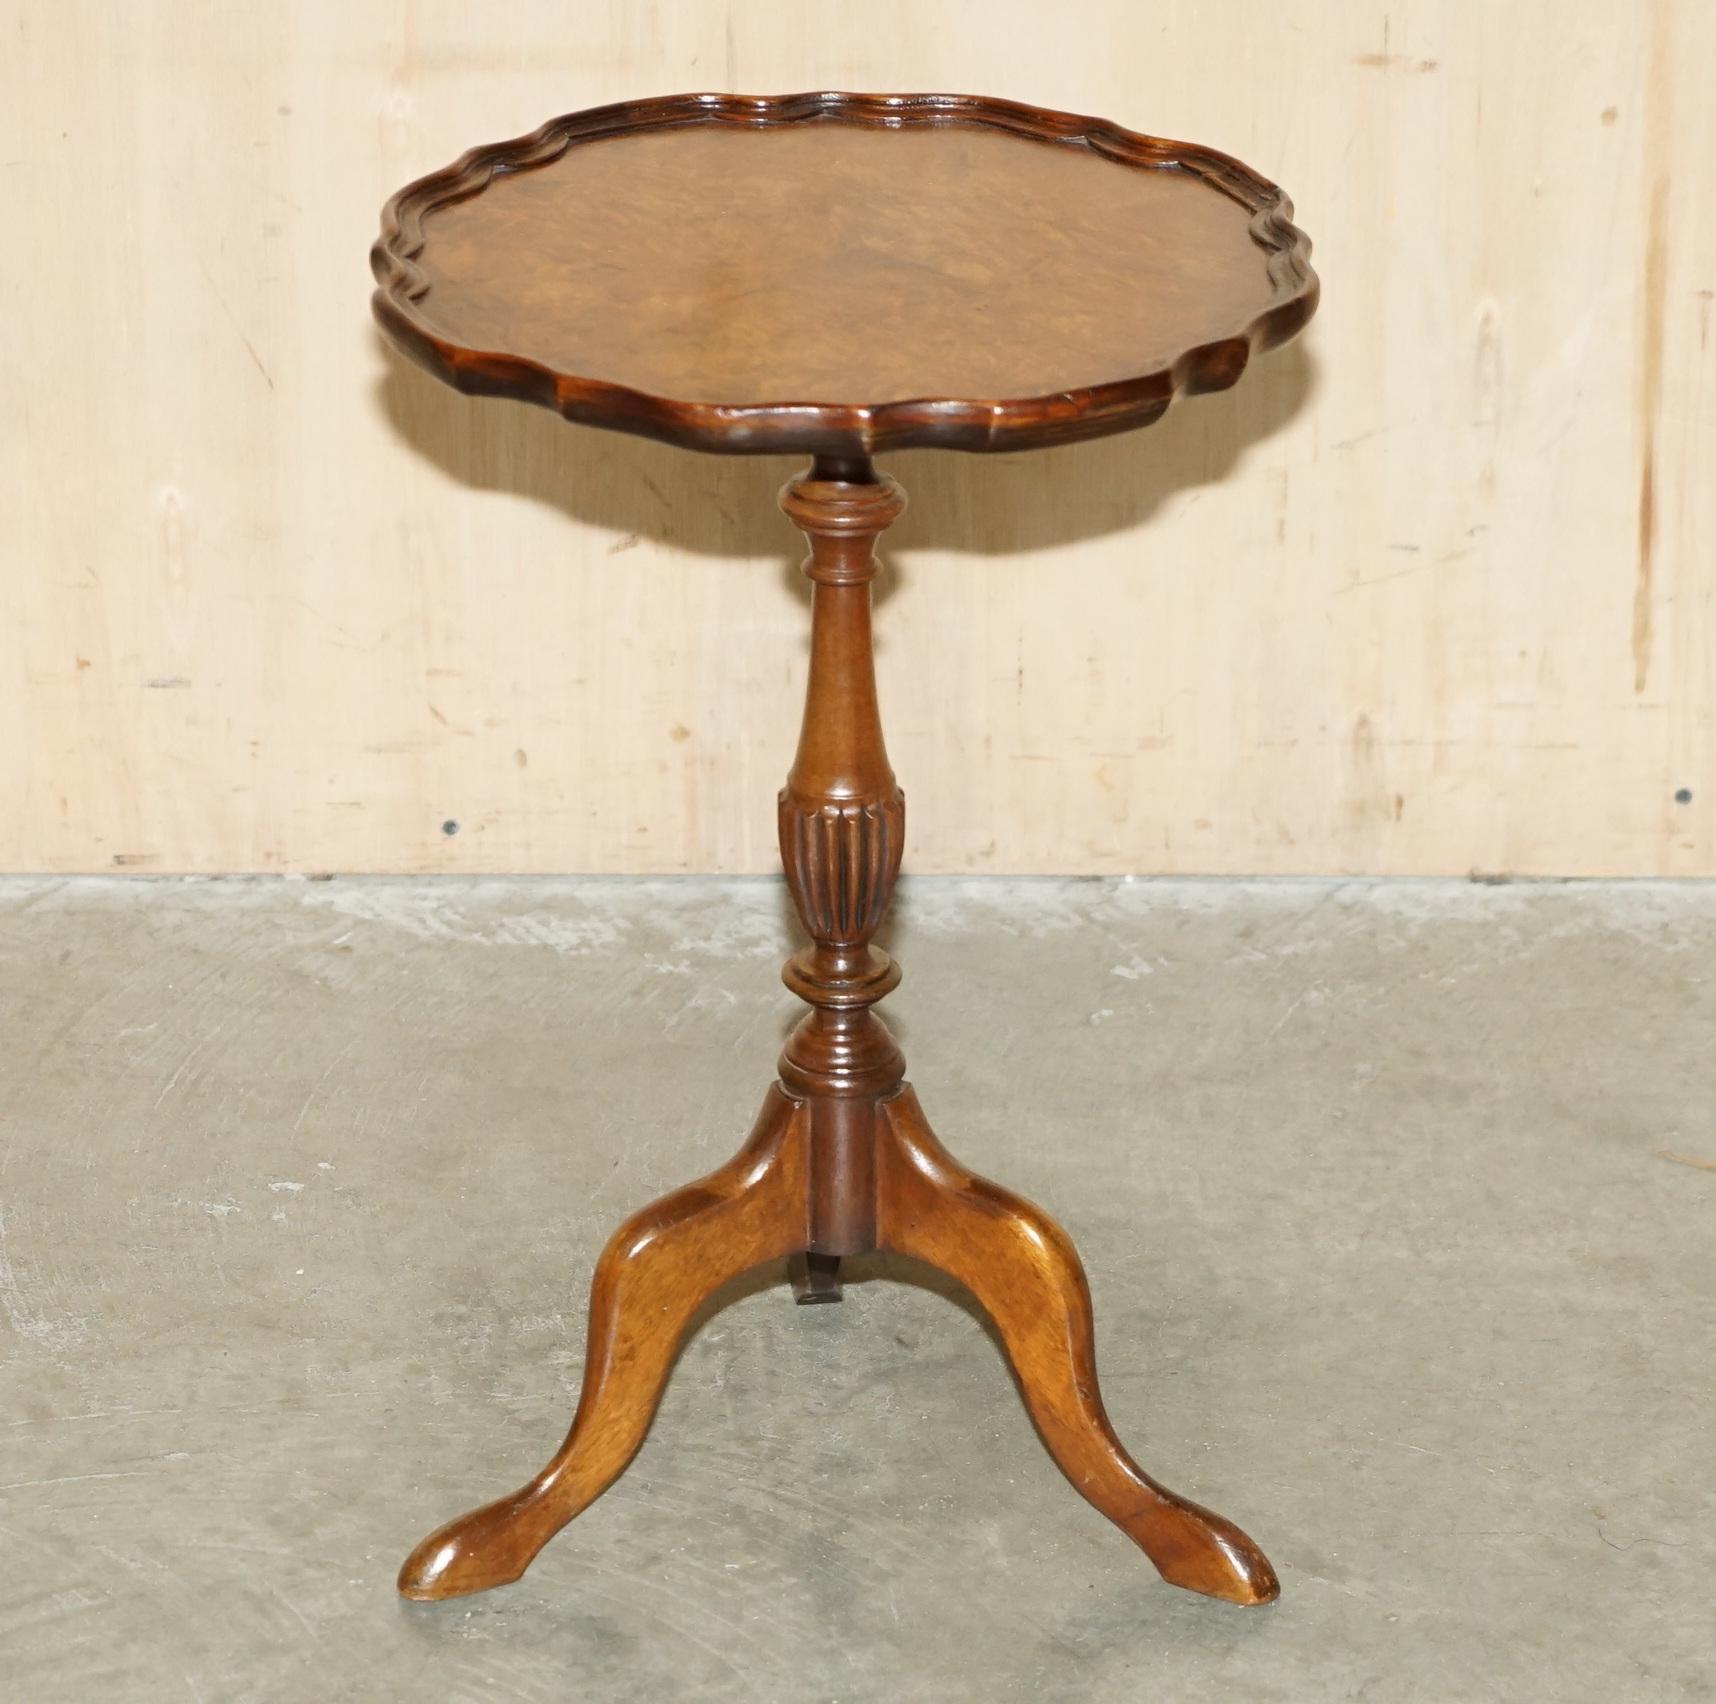 Royal House Antiques

Royal House Antiques is delighted to offer for sale this absolutely exquisite, handmade, Burr Walnut side end table with a fluted column base and pie-crest edge top 

Please note the delivery fee listed is just a guide, it